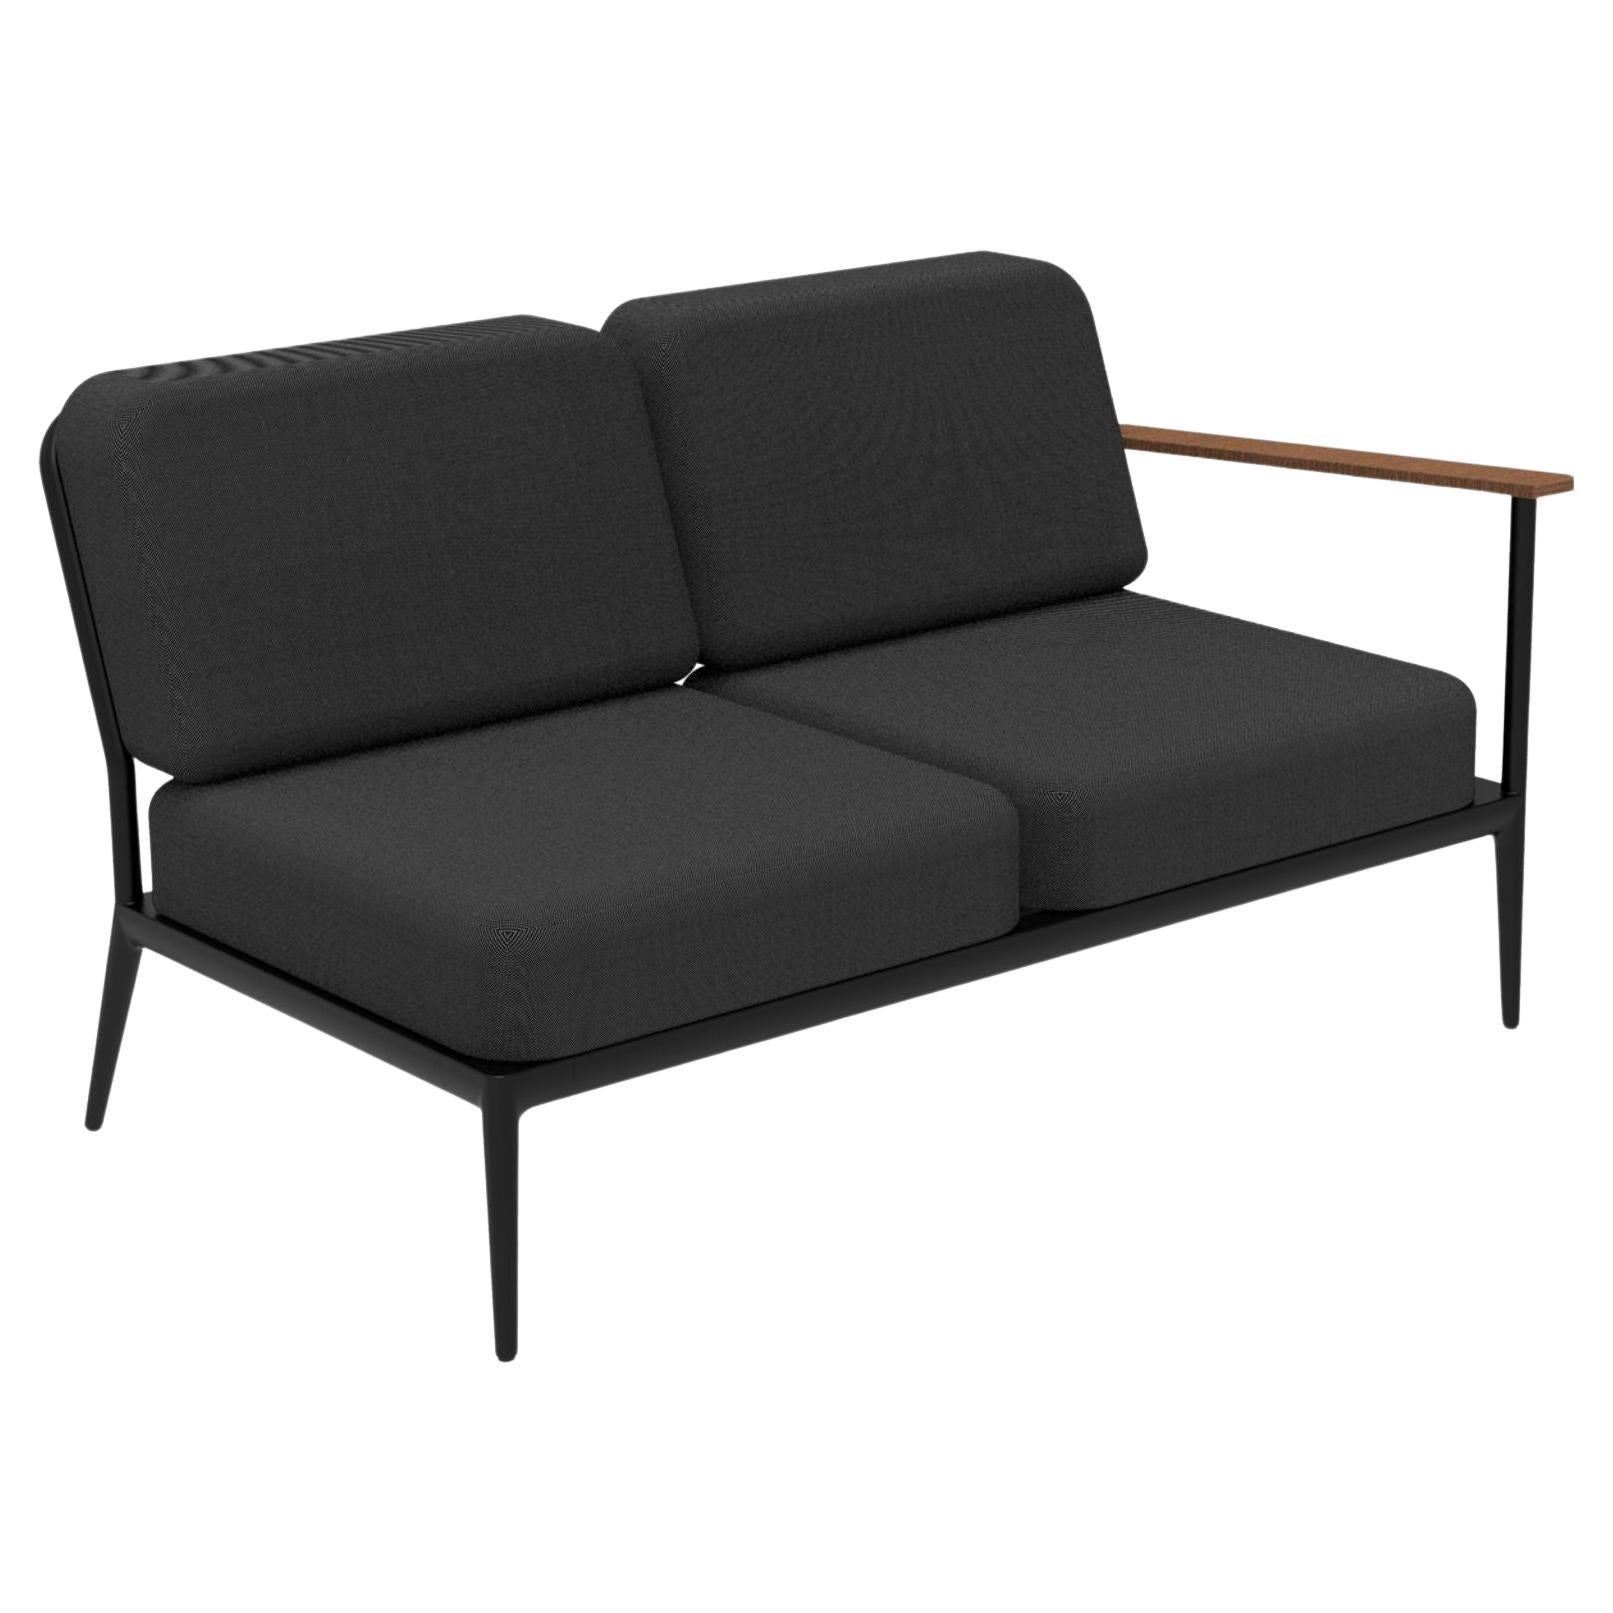 Nature Black Double Left Modular Sofa by MOWEE